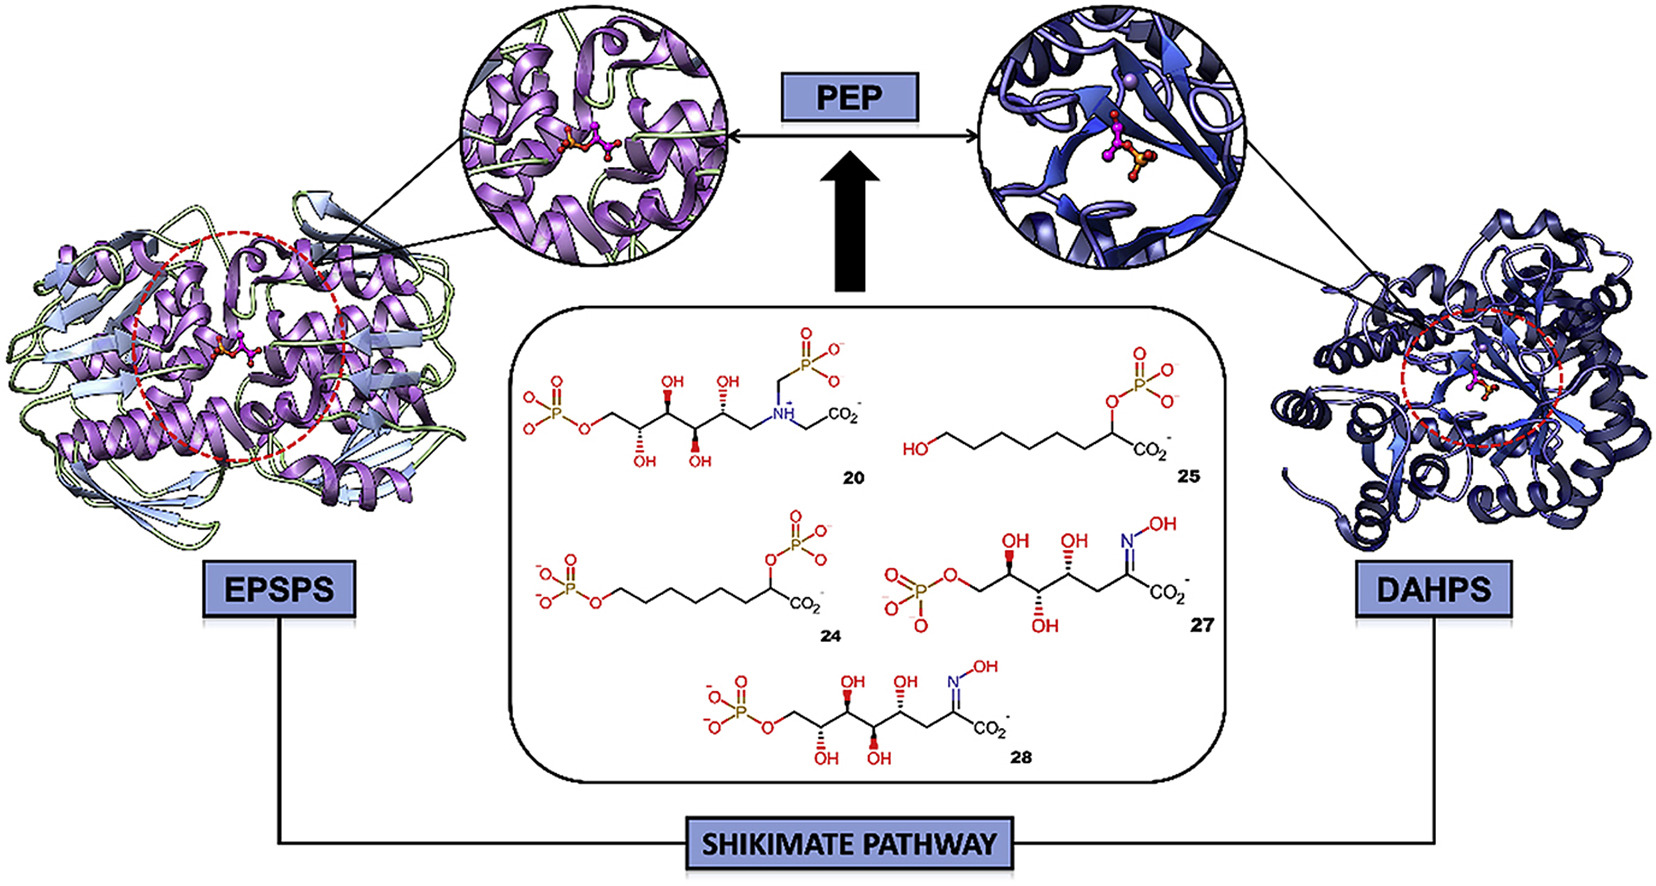 Graphical abstract for "Targeting shikimate pathway: In silico analysis of phosphoenolpyruvate derivatives as inhibitors of EPSP synthase and DAHP synthase"